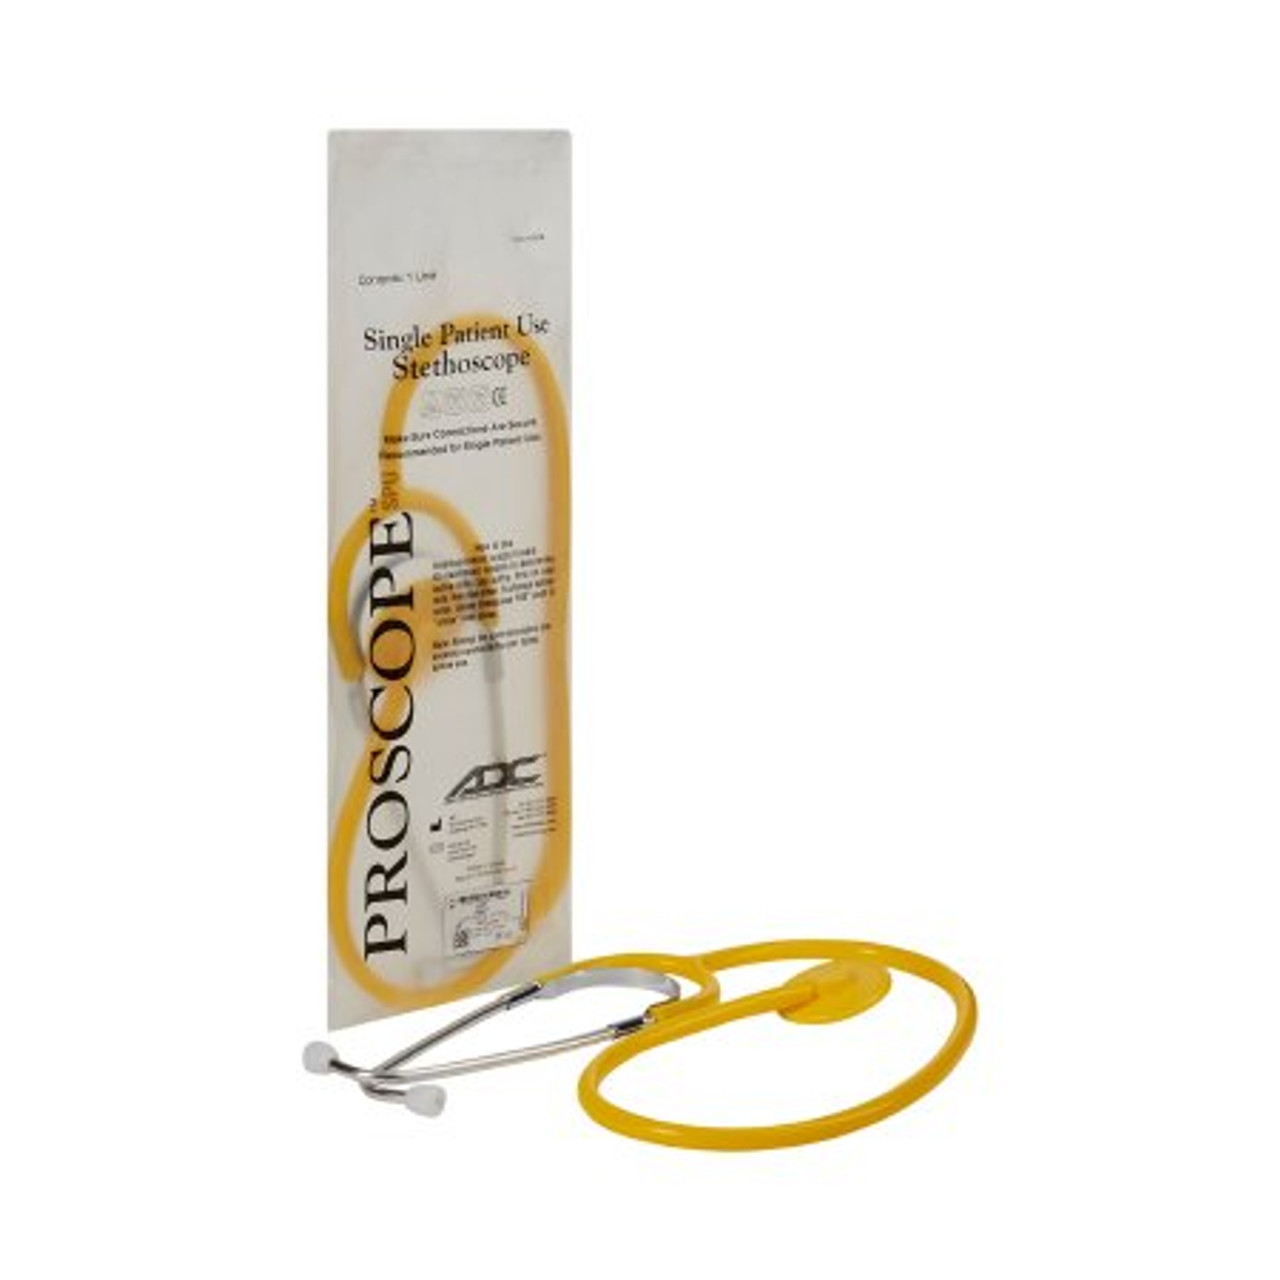 ADC Disposable Proscope Stethoscope, Yellow, 1 Tube, 22 inch, Single Head Chestpiece, Box of 10